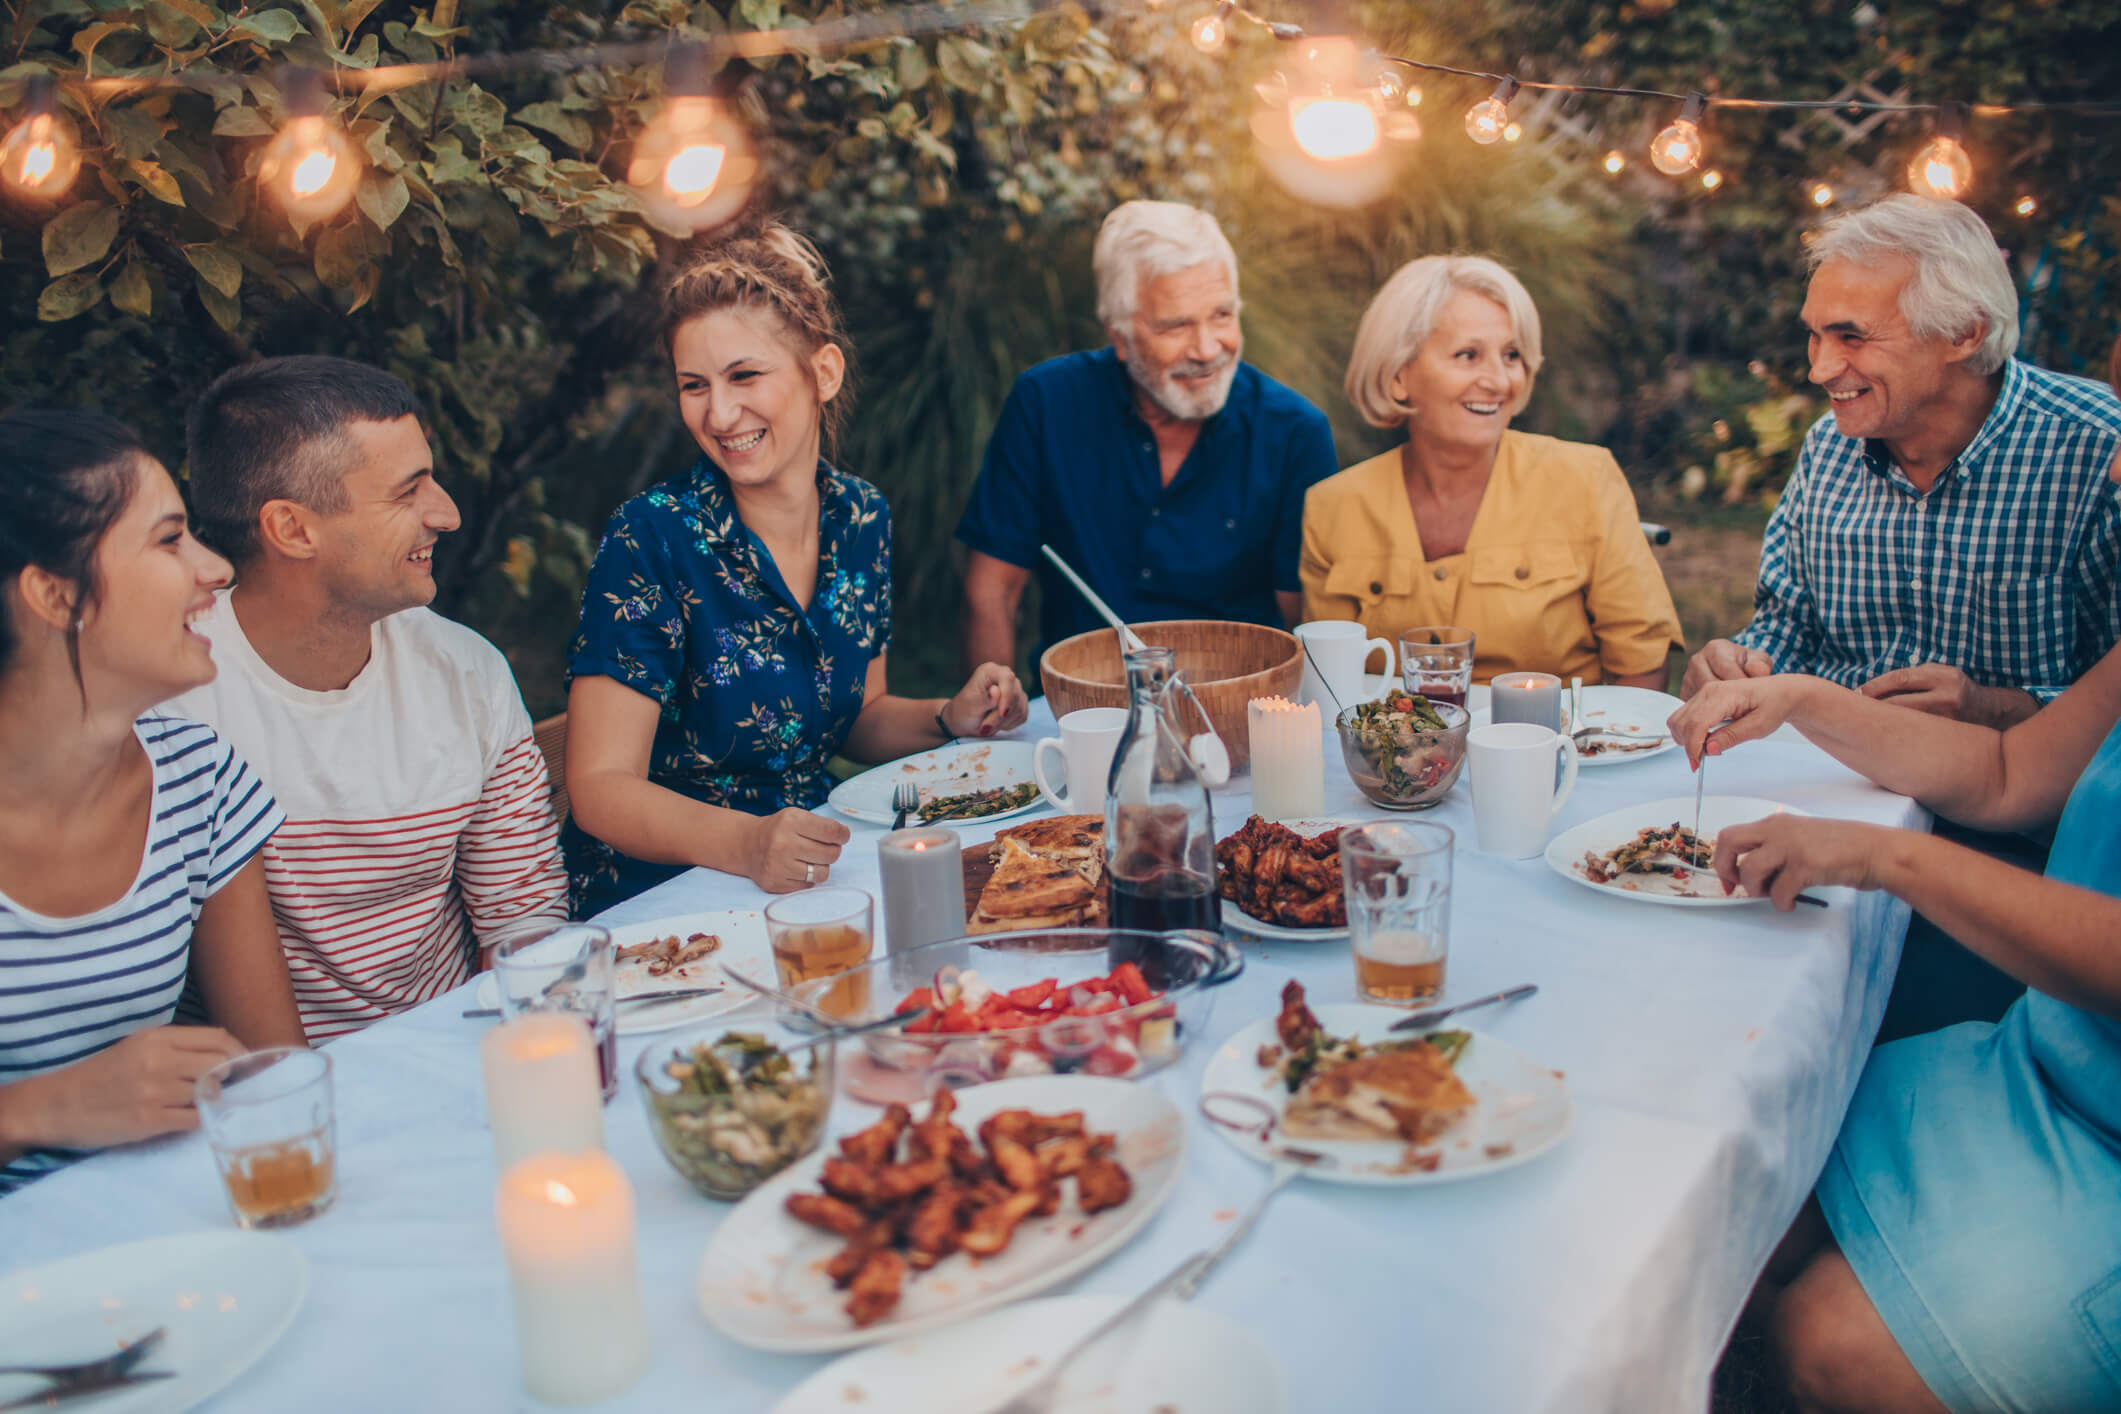 Multi-generational family eating together outside